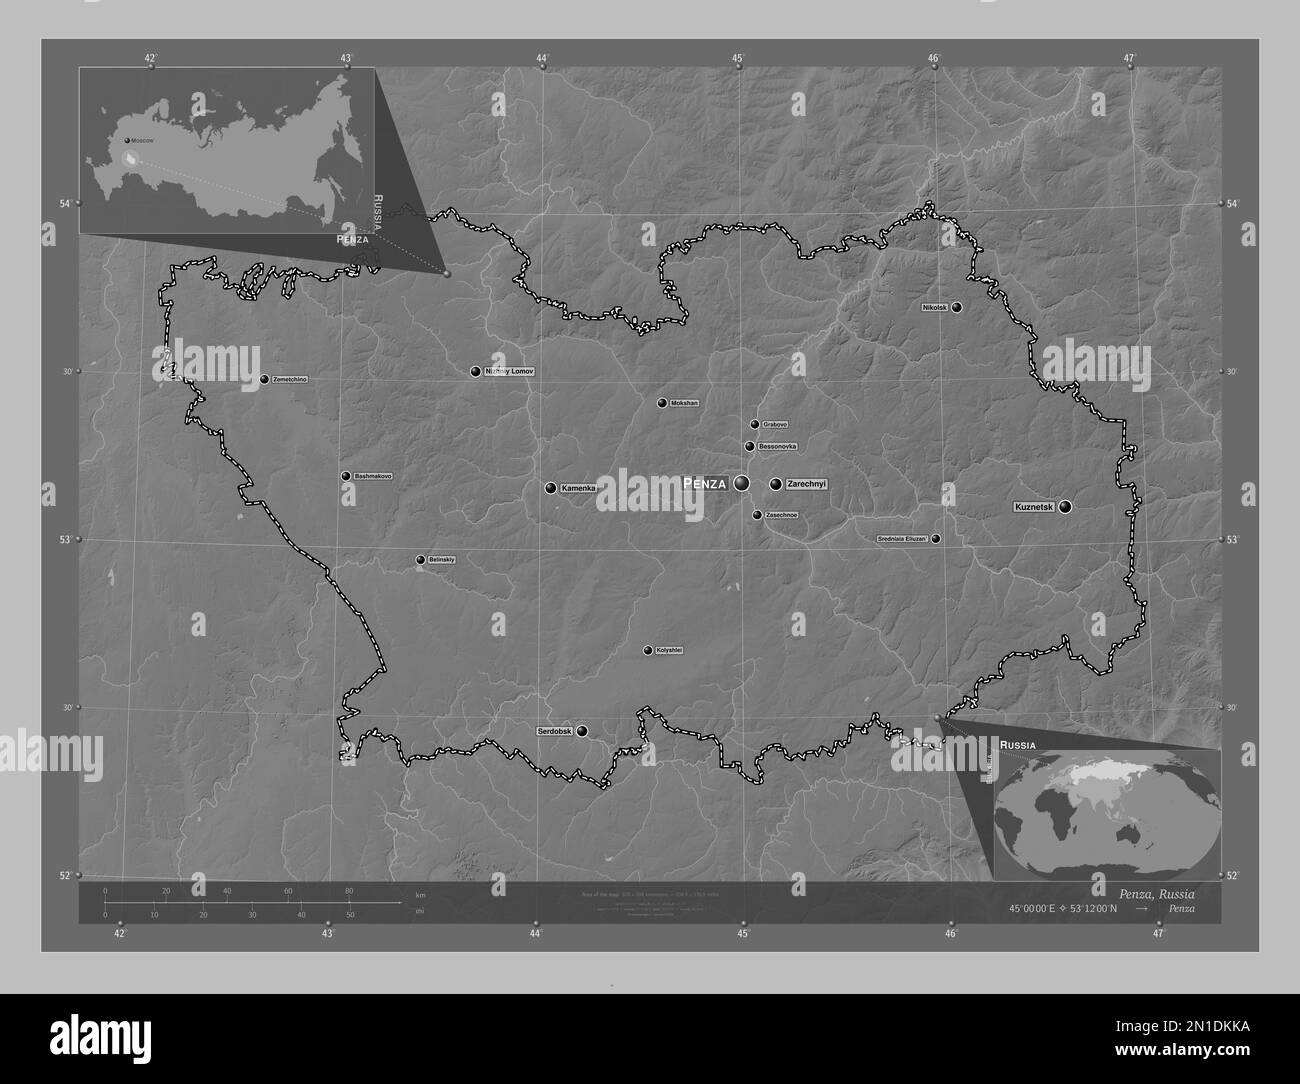 Penza, region of Russia. Grayscale elevation map with lakes and rivers. Locations and names of major cities of the region. Corner auxiliary location m Stock Photo